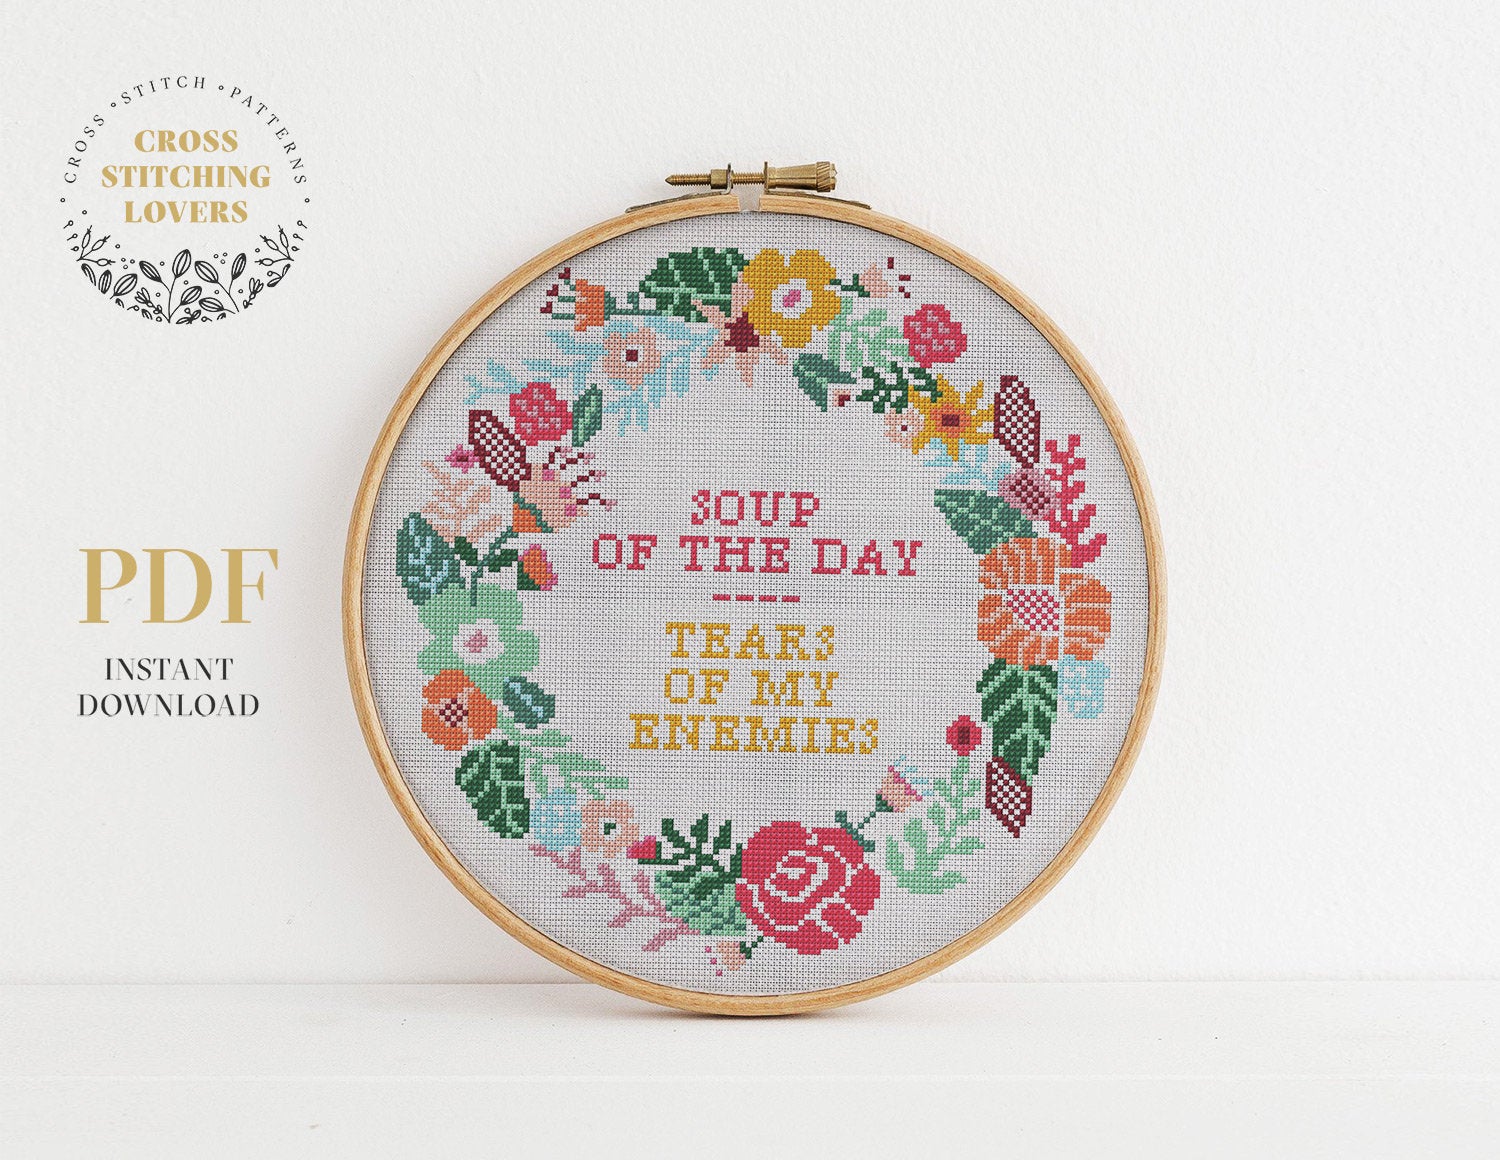 Soup of the Day - Tears Of My Enemies - Cross stitch pattern